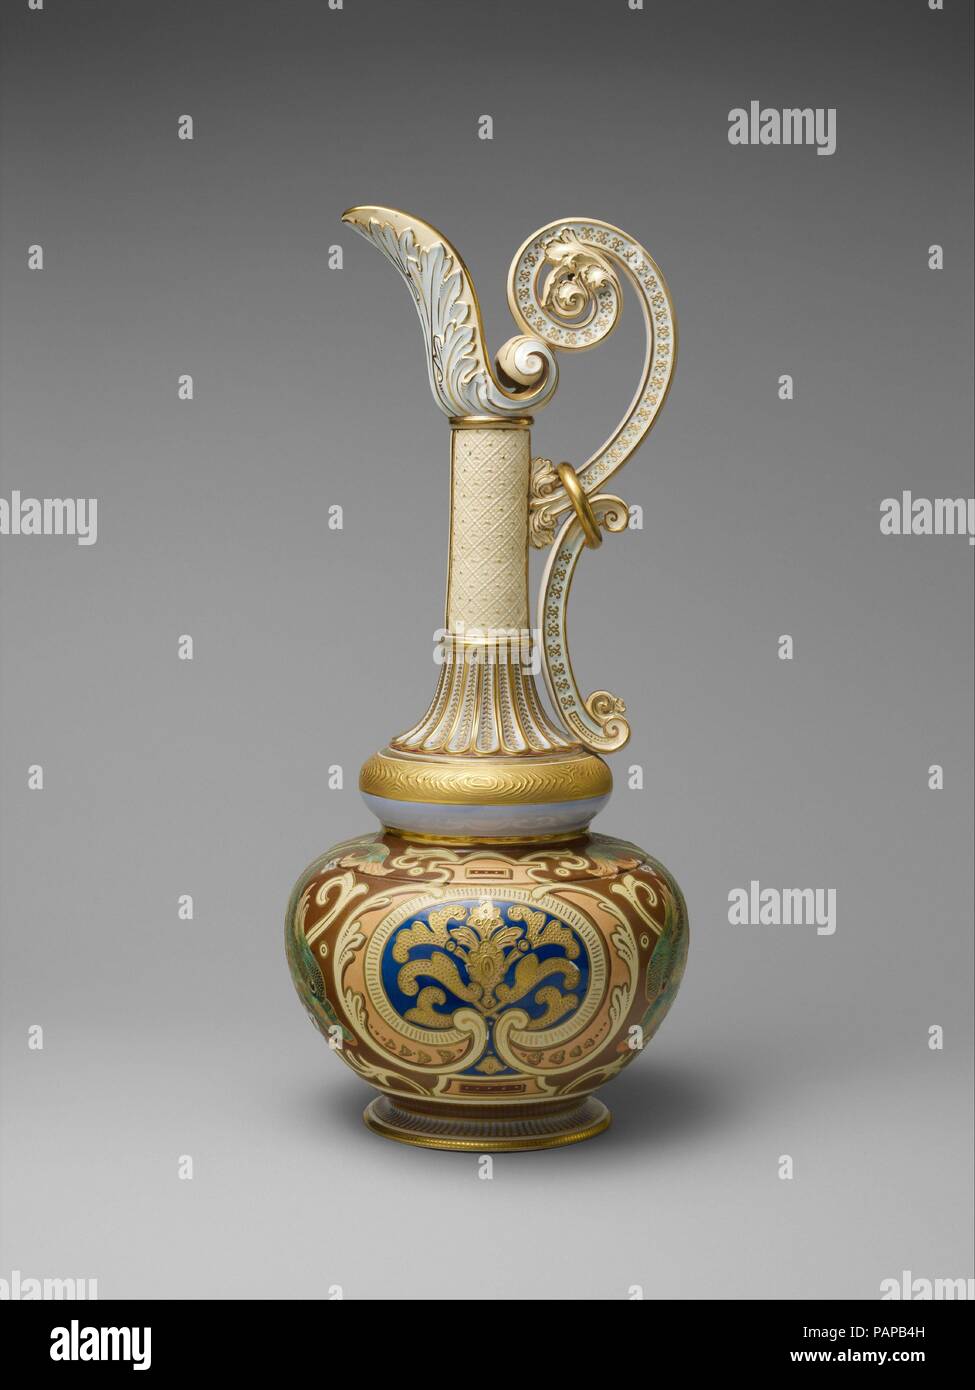 Ewer. Culture: American. Designer: Designed by Edward Lycett (1833-1910). Dimensions: H. 22 in. (55.9 cm). Manufacturer: Faience Manufacturing Company (American, New York, 1881-1892). Date: 1886-90.  At 22 inches high, this ewer is one of the five largest known vessels produced by the Faience Manufacturing Company, and this example displays one of at least four different motifs associated with this form. Rising from a bulbous double-gourd-form body, stacked elements that display classicizing ornament emphasize the ewer's elongated form. Opposing foliate scrolls, joined by an illusionistic gilt Stock Photo